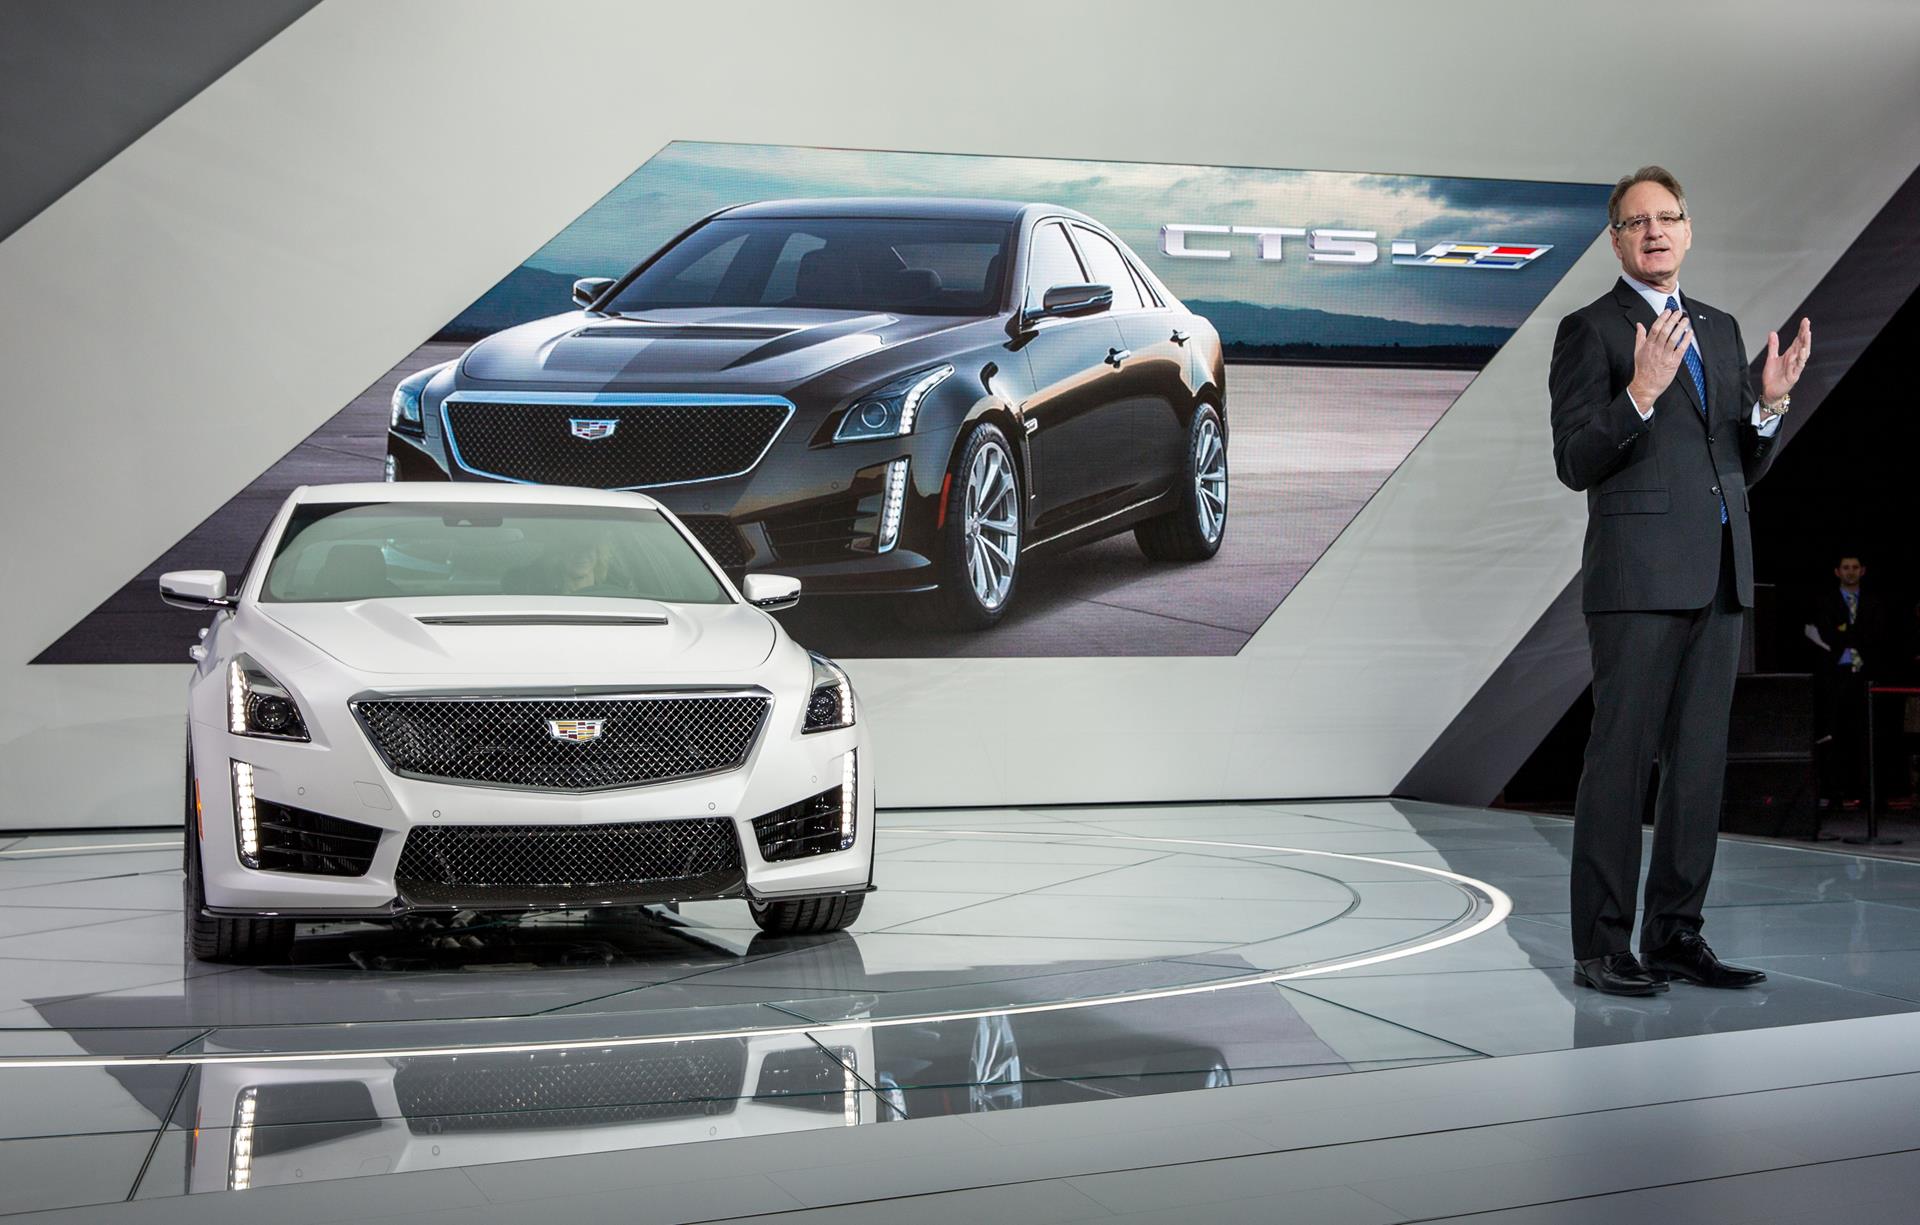 Cadillac Middle East Gears Up for Next-Generation 640-hp Cadillac CTS-V Launch Later This Year